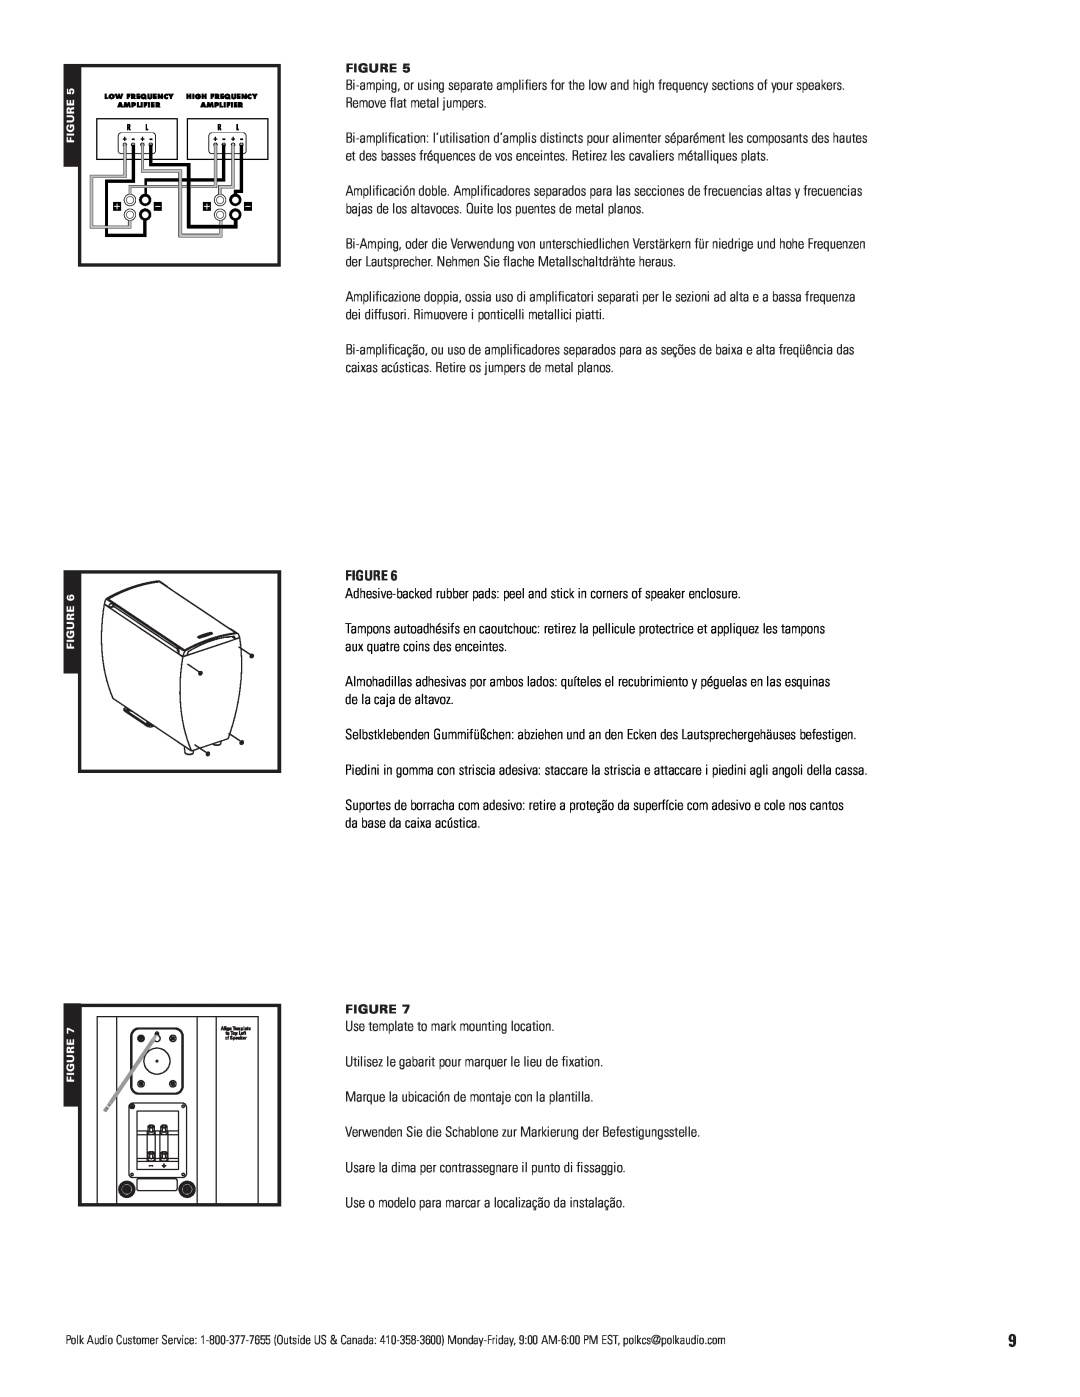 Polk Audio AM9975-C4, AM7775-B owner manual Use template to mark mounting location 